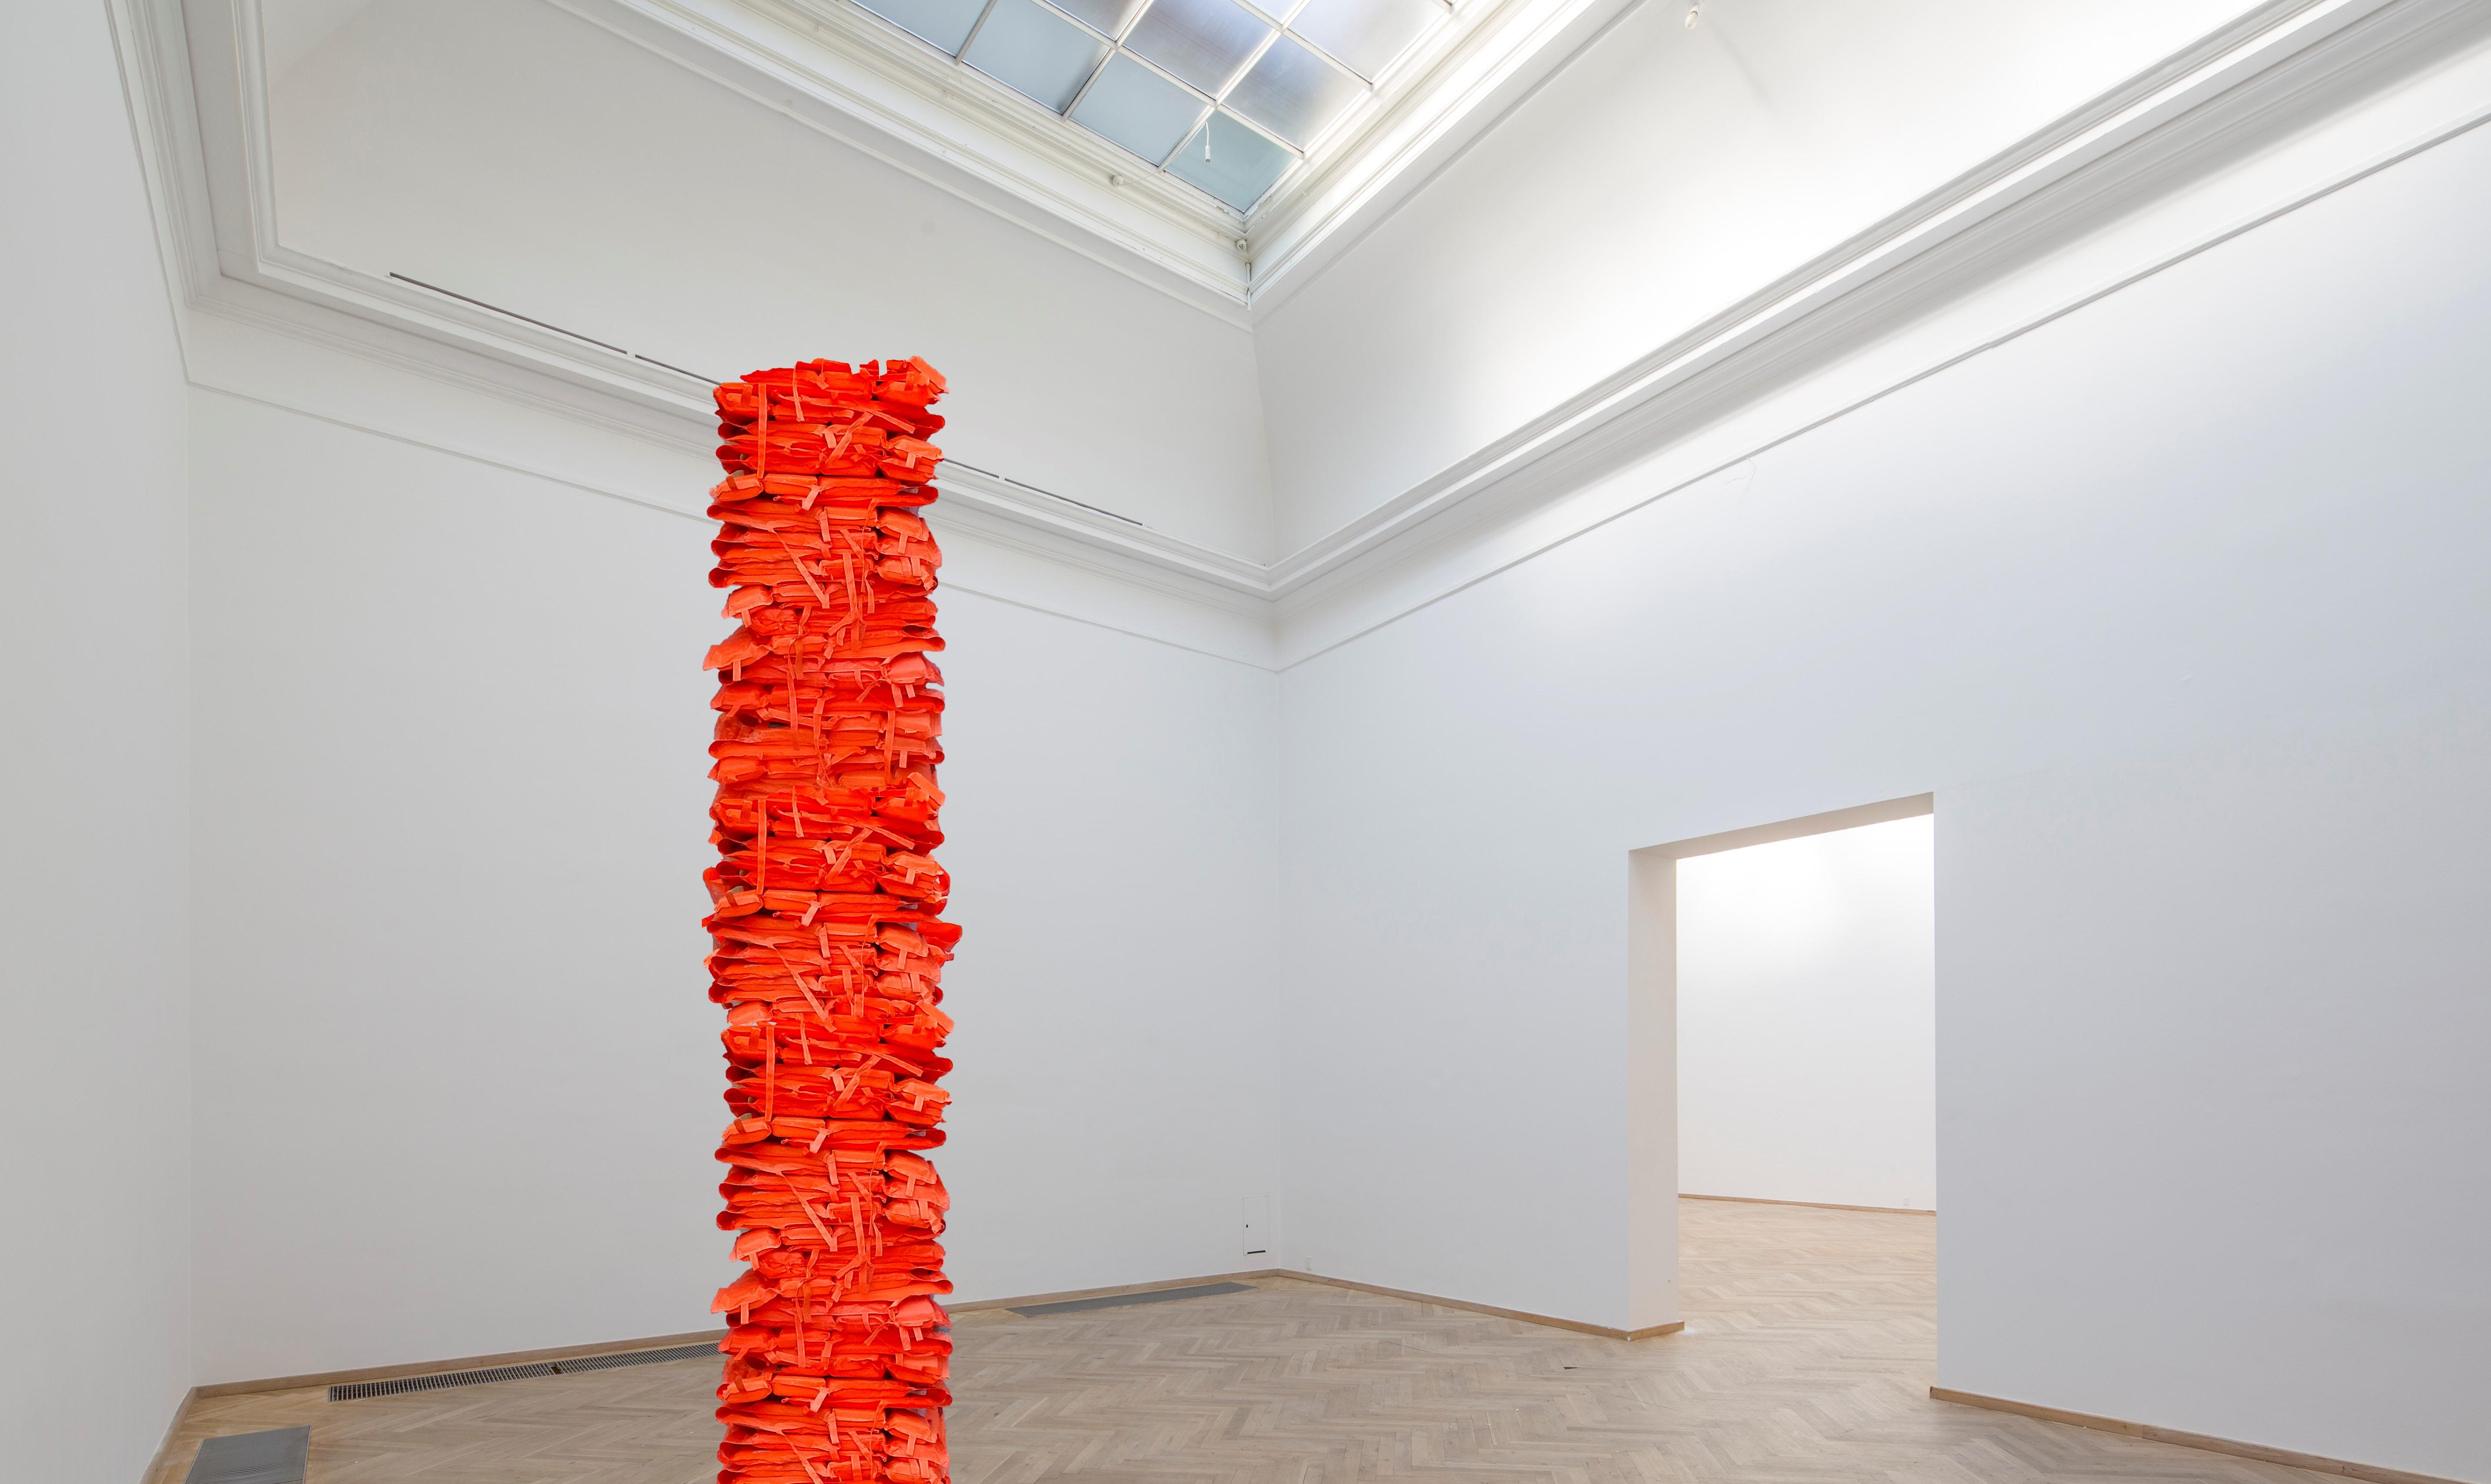 Photograph of a pillar made of stacked bright orange life jackets